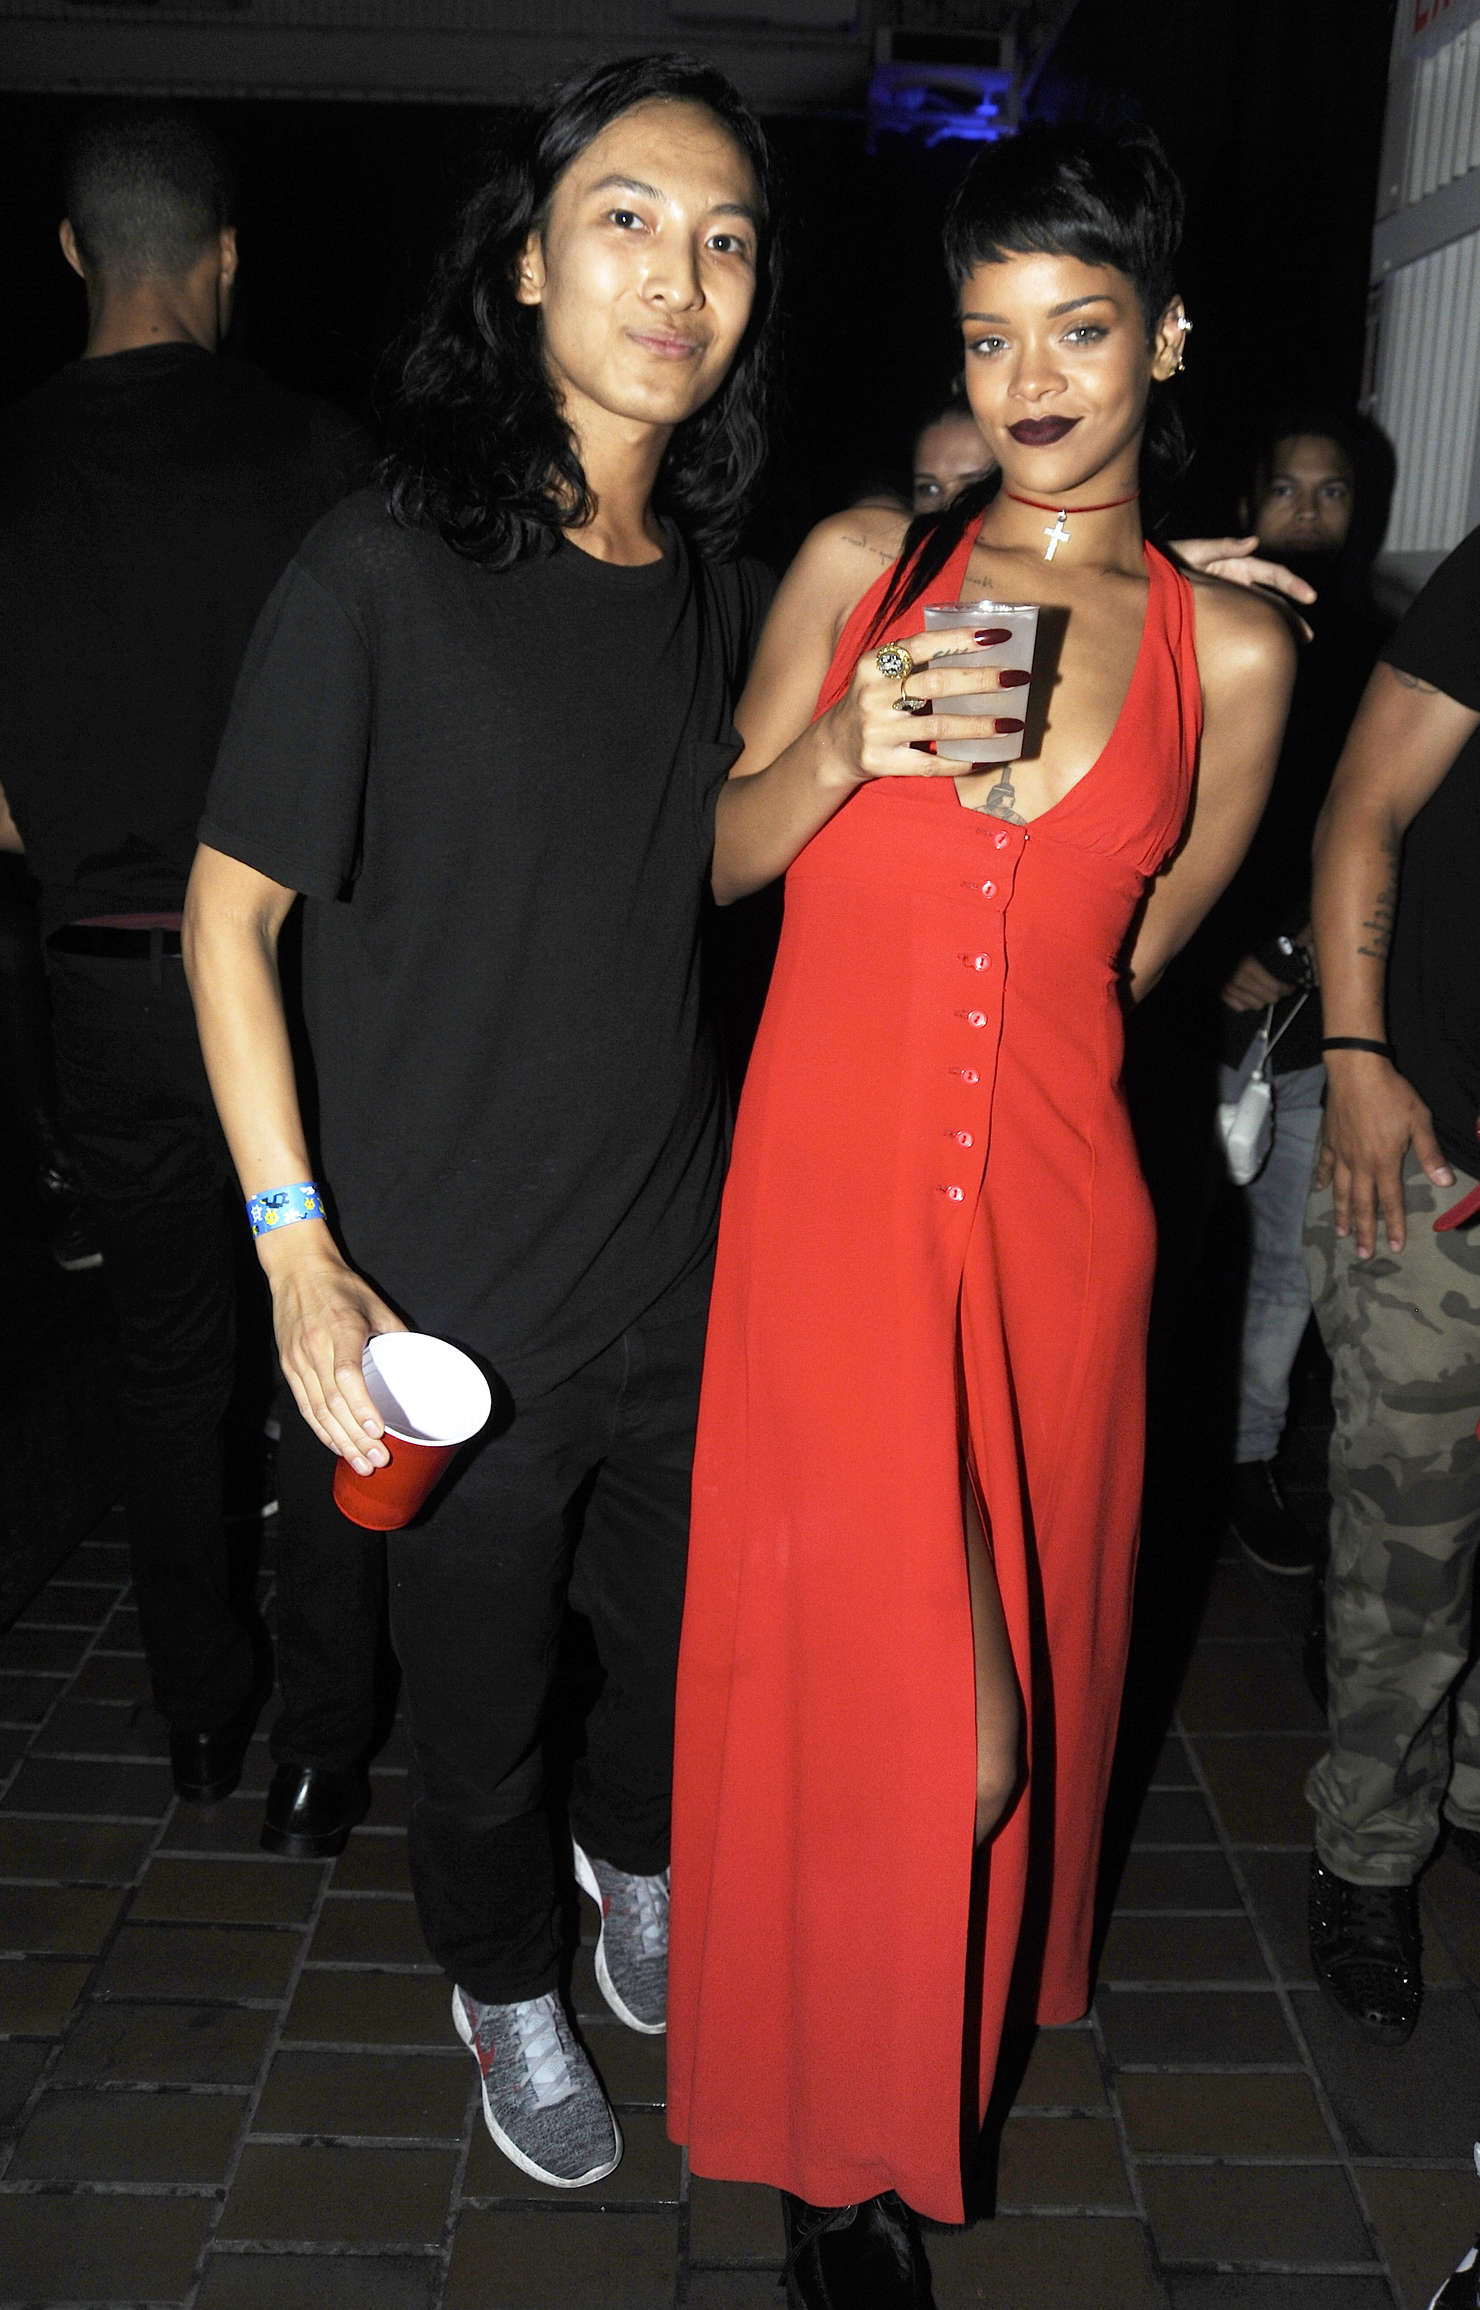 Back to post Rihanna in a red dress at New York Fashion